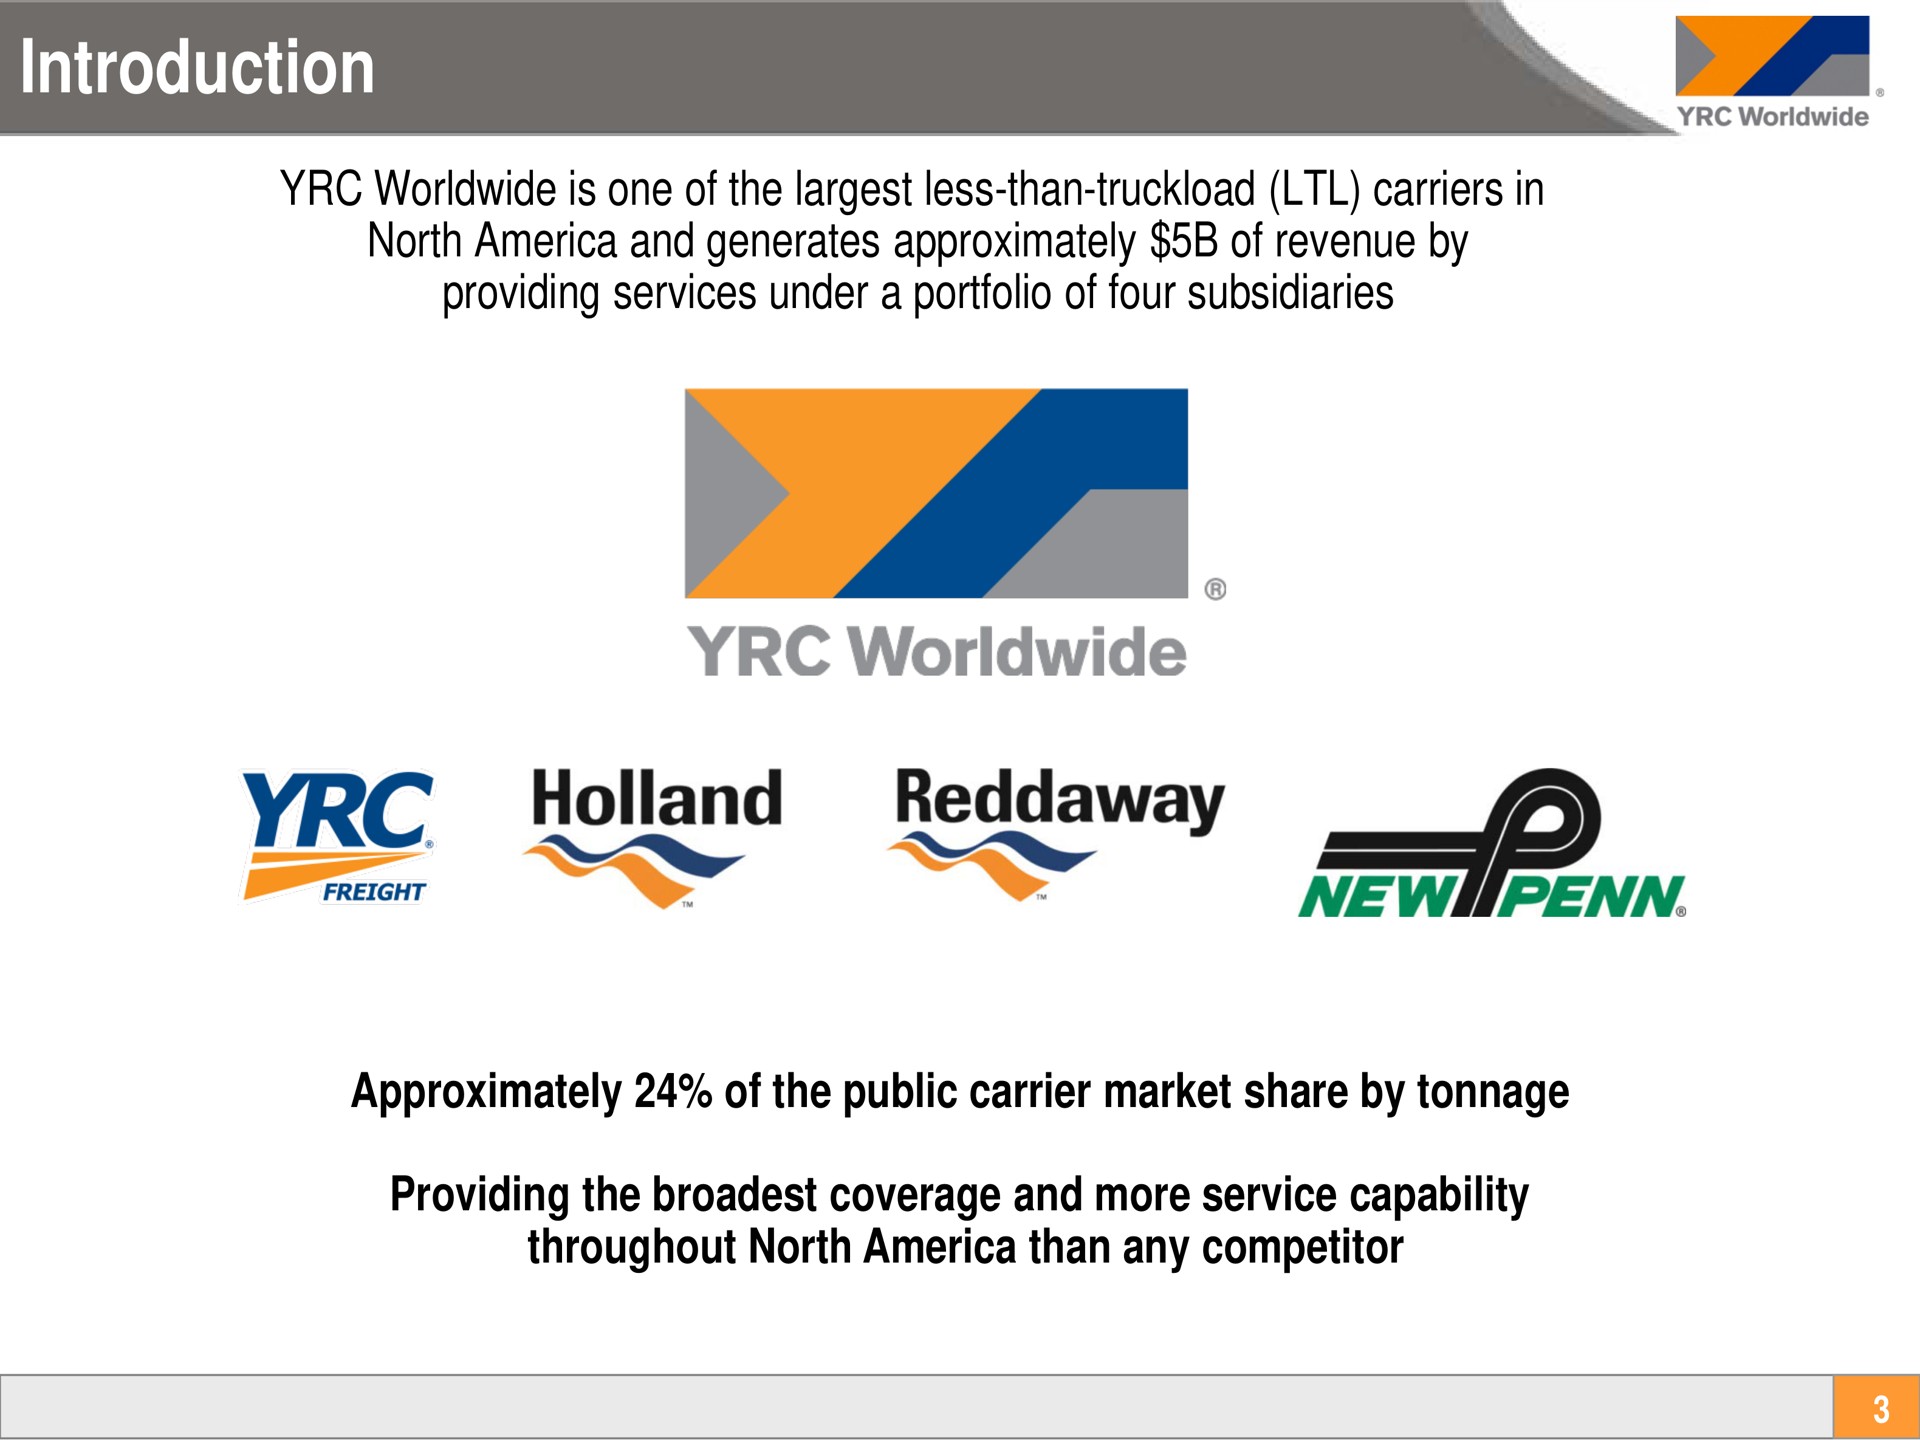 introduction is one of the less than truckload carriers in north and generates approximately of revenue by providing services under a portfolio of four subsidiaries approximately of the public carrier market share by tonnage providing the coverage and more service capability throughout north than any competitor fan | Yellow Corporation